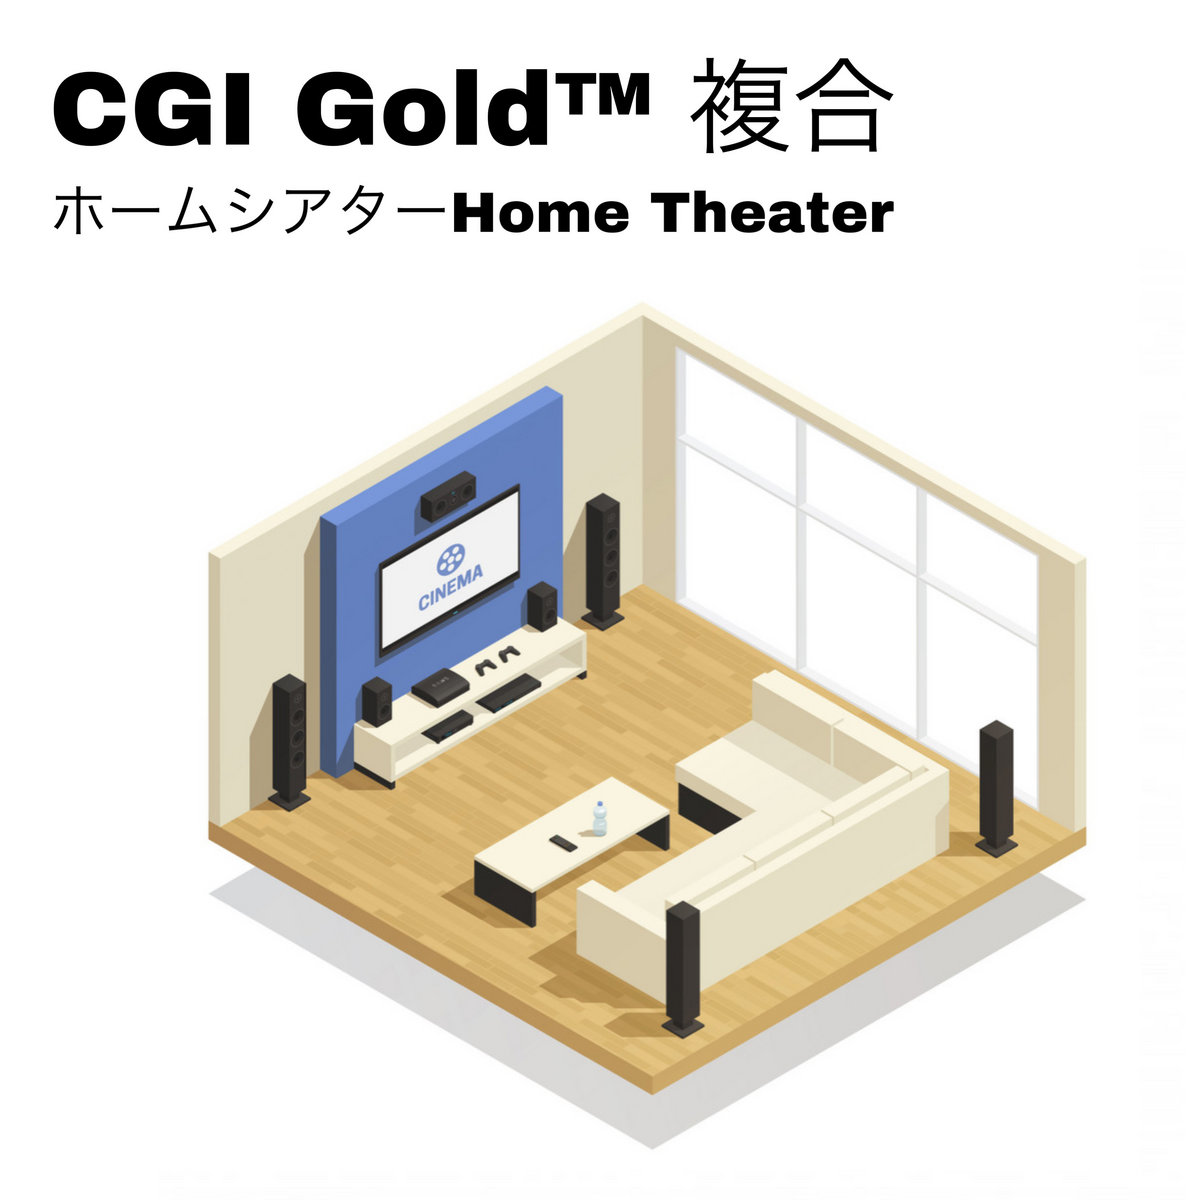 Home Theater, by CGI Gold™ 複合